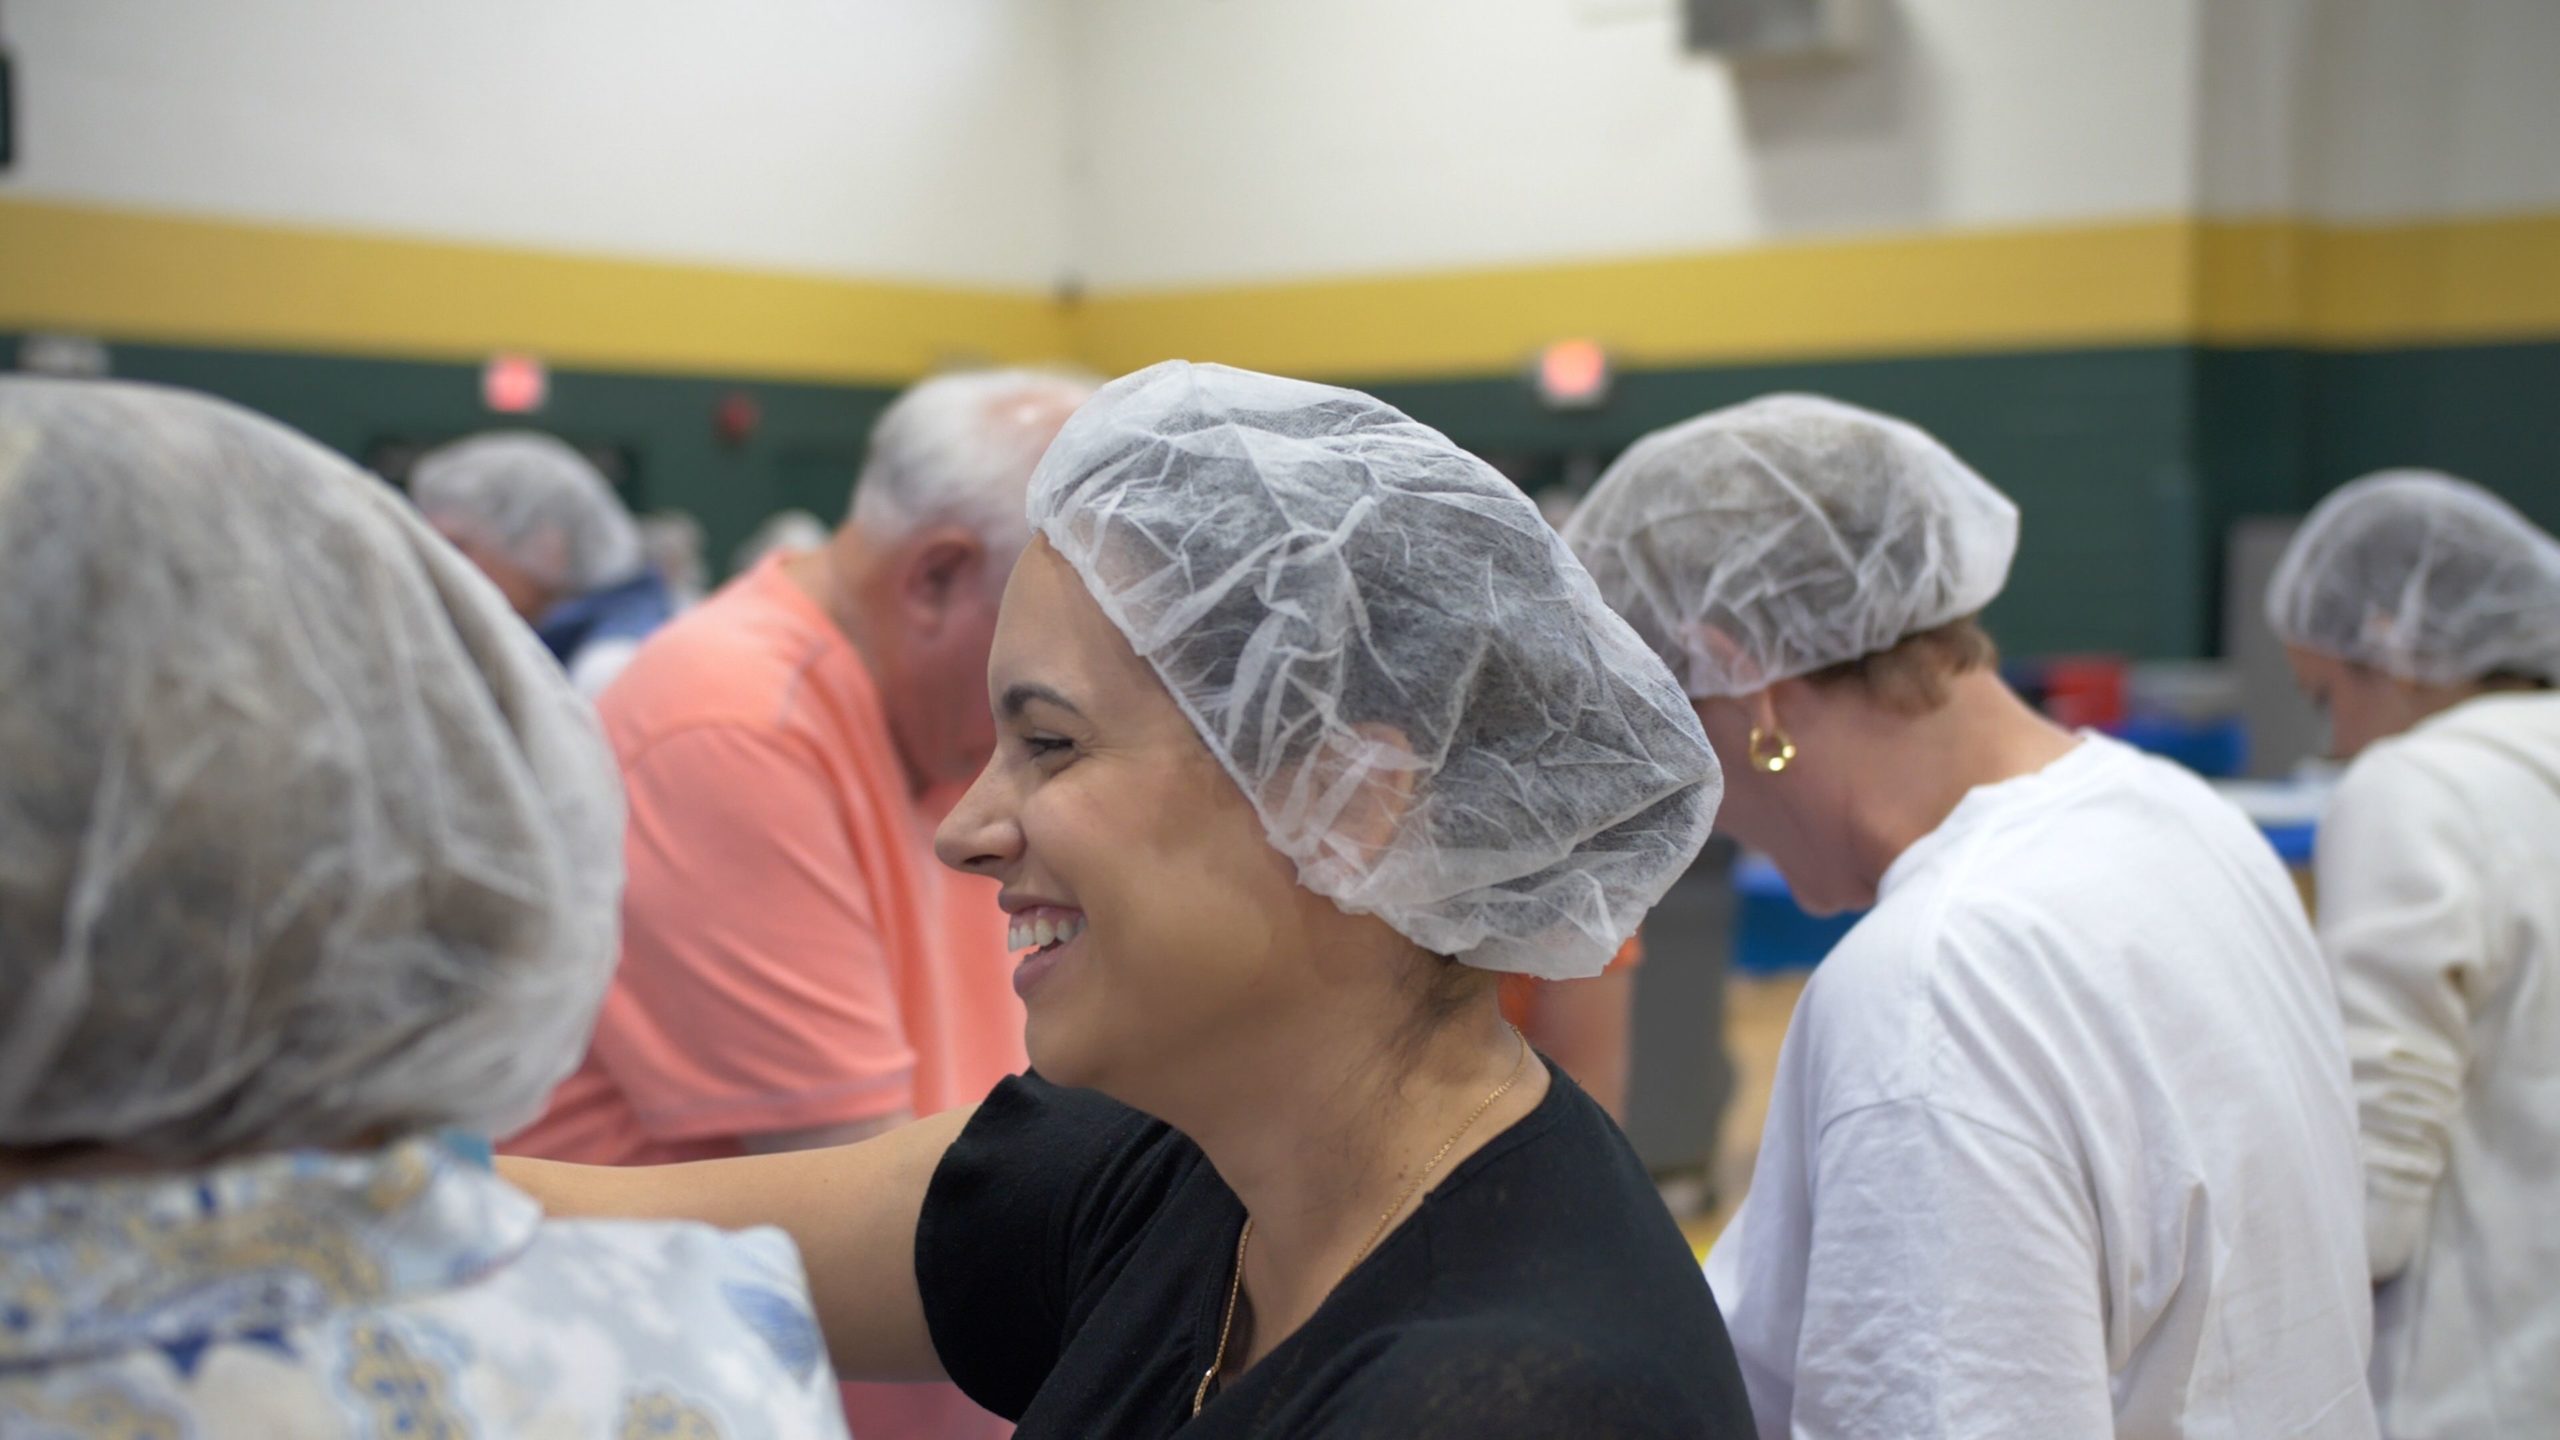 4,500+ Volunteers to Pack 1.5 Million Meals for 9/11 Day Of Service